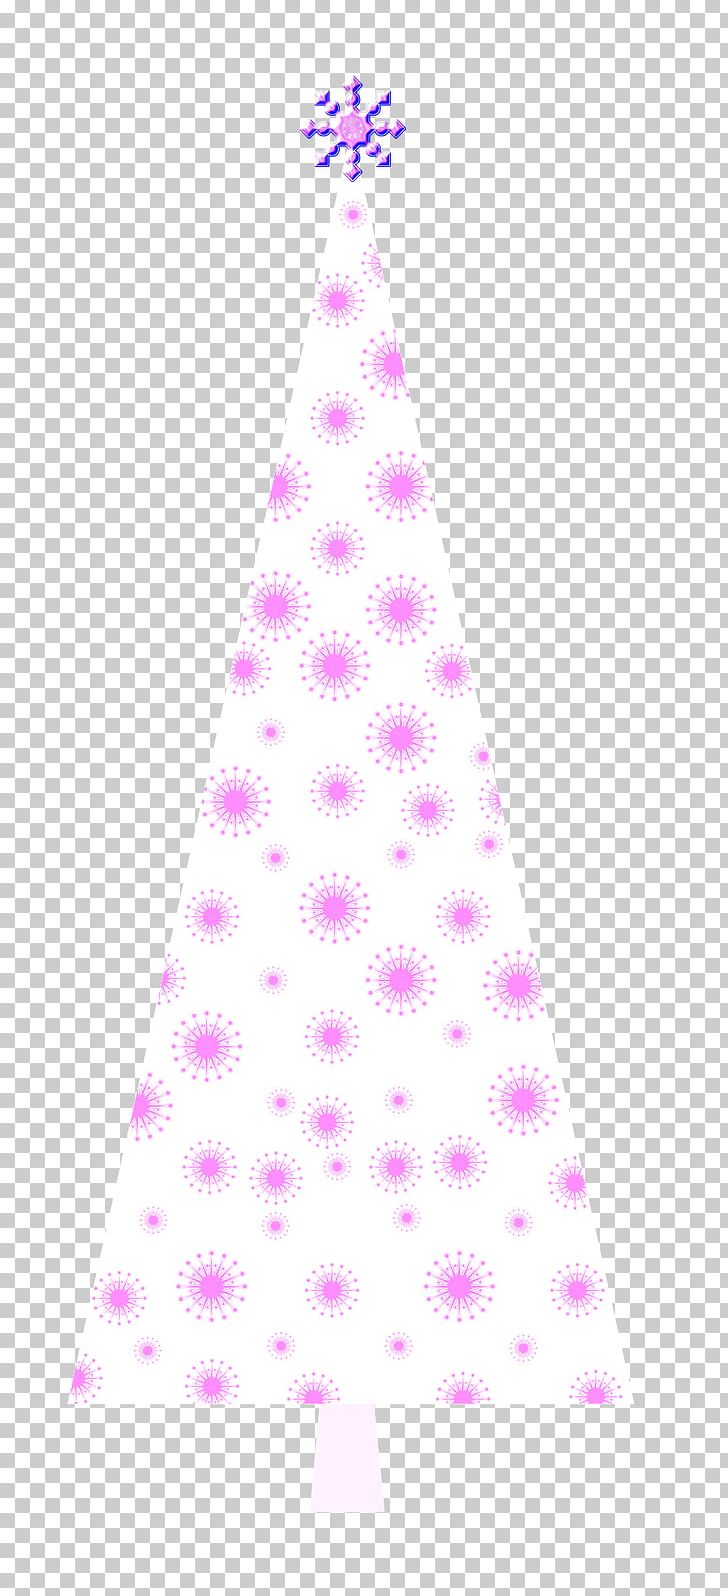 Christmas Tree Spruce Christmas Ornament Fir Pink M PNG, Clipart, Christmas, Christmas Day, Christmas Decoration, Christmas Ornament, Christmas Tree Free PNG Download